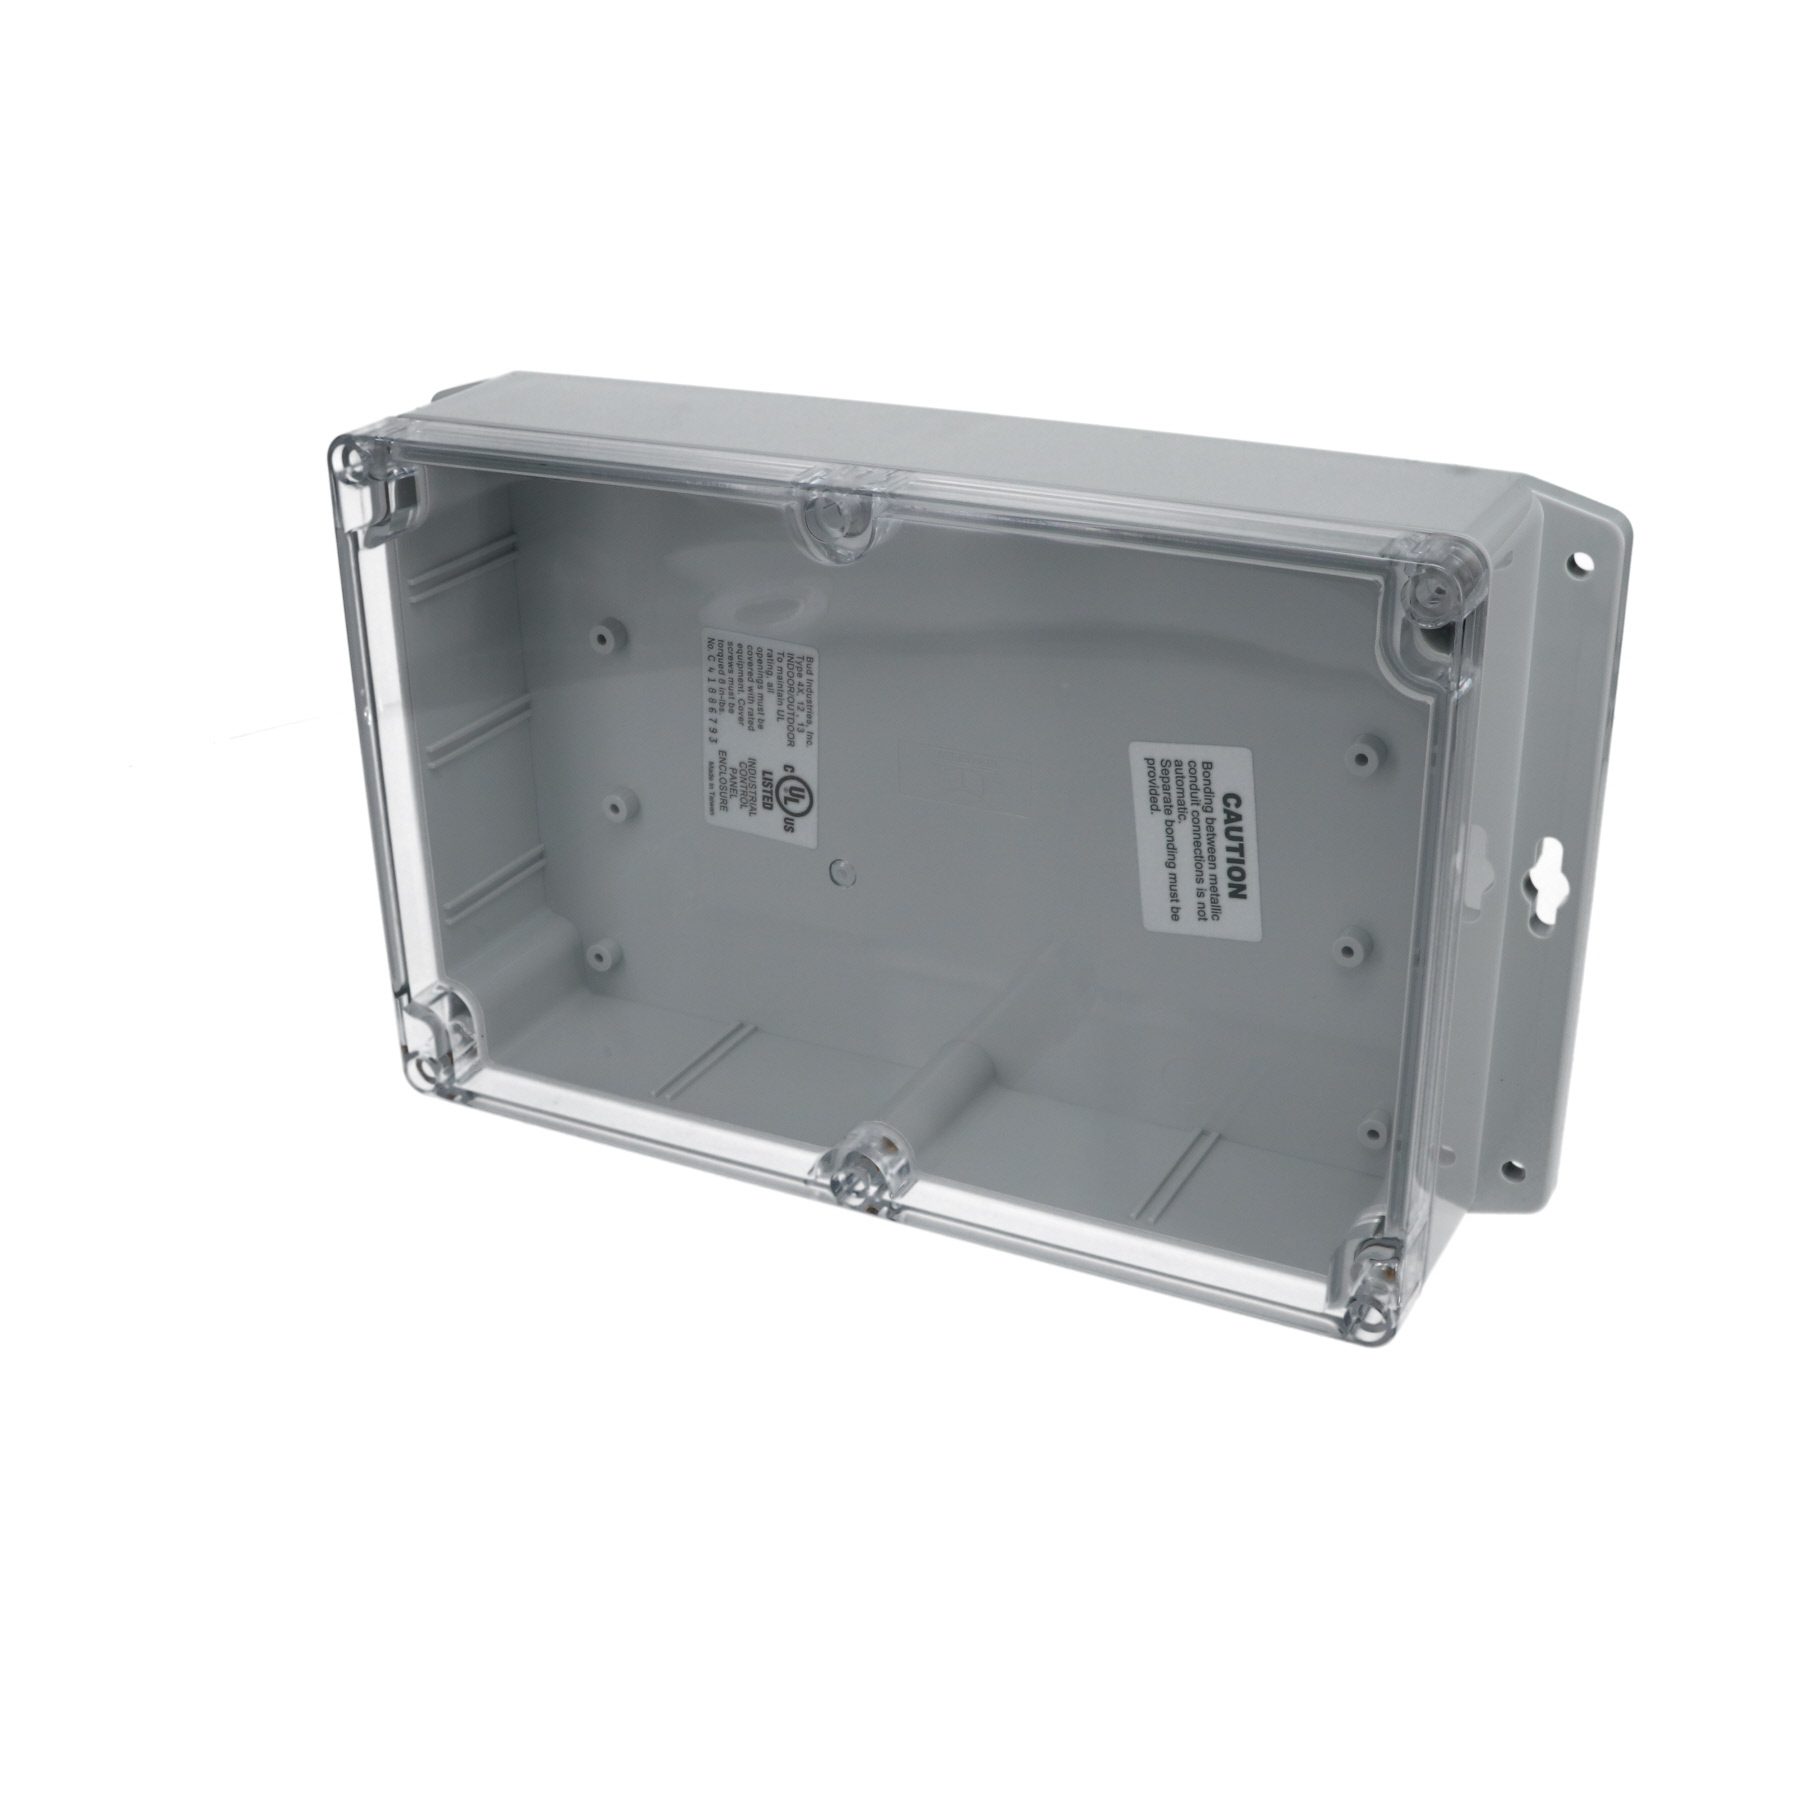 IP65 NEMA 4X Box with Clear Cover and Mounting Brackets PN-1325-CMB